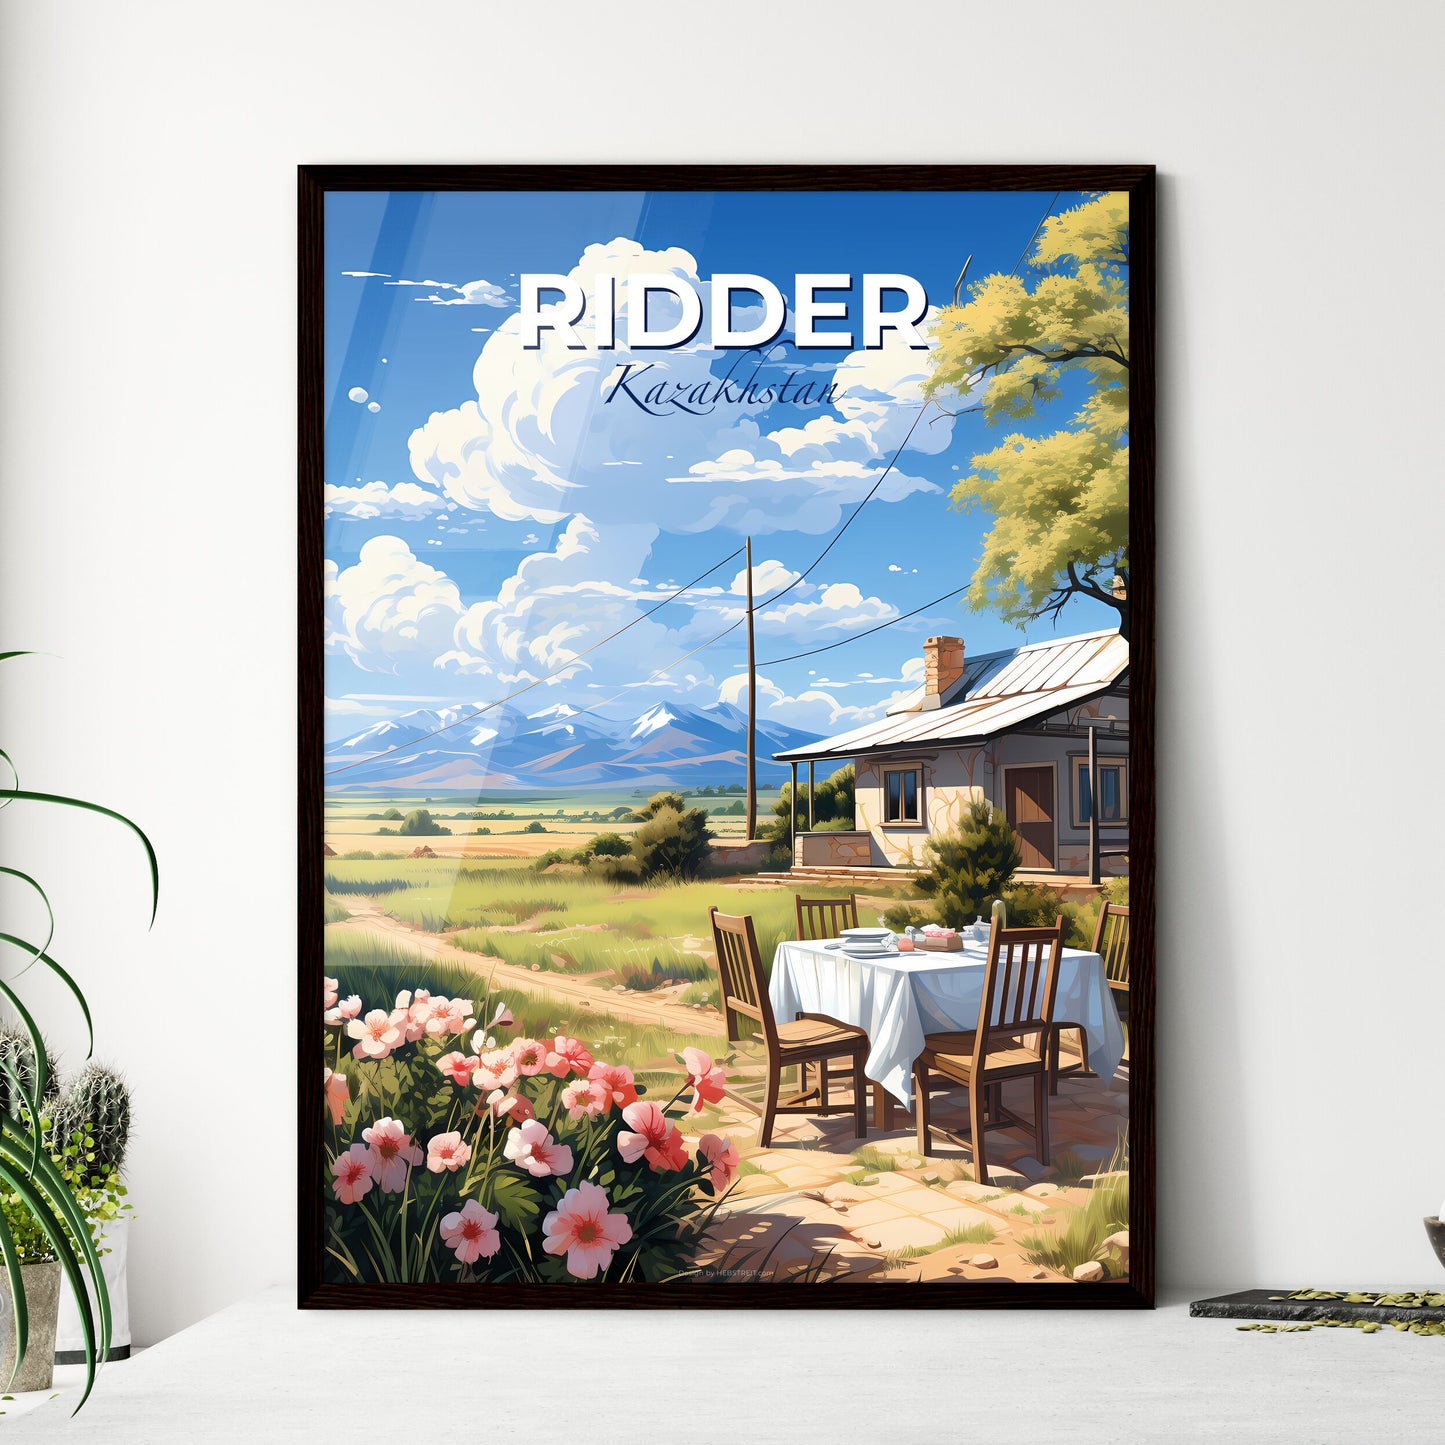 Ridder, Kazakhstan, A Poster of a table and chairs outside a house Default Title